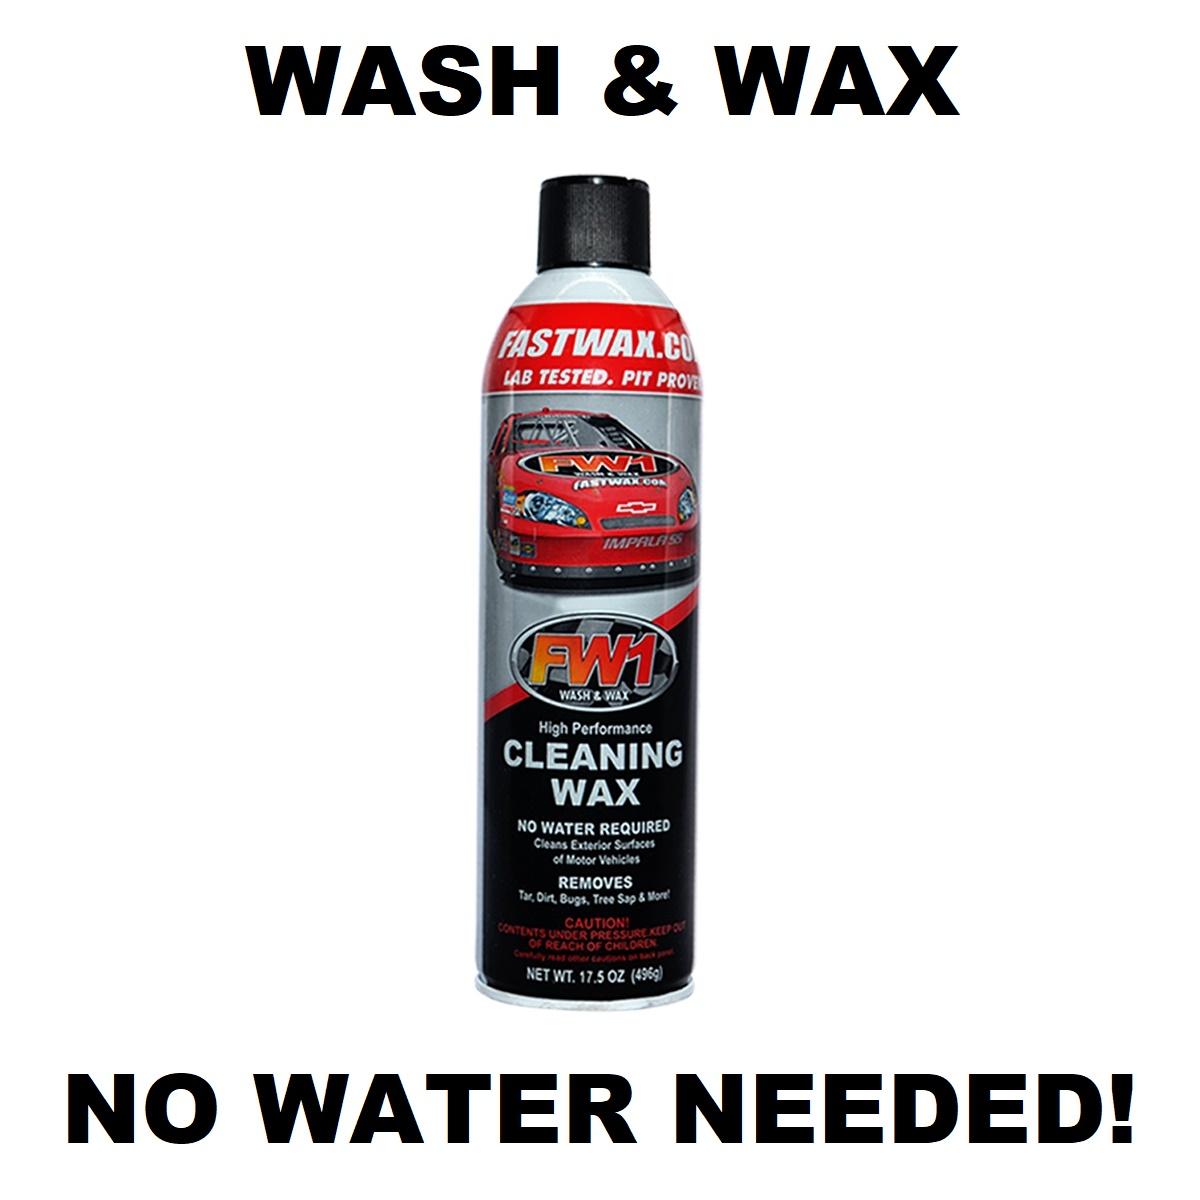  FW1 Wash&Wax High Performance Cleaning Wax Np Water